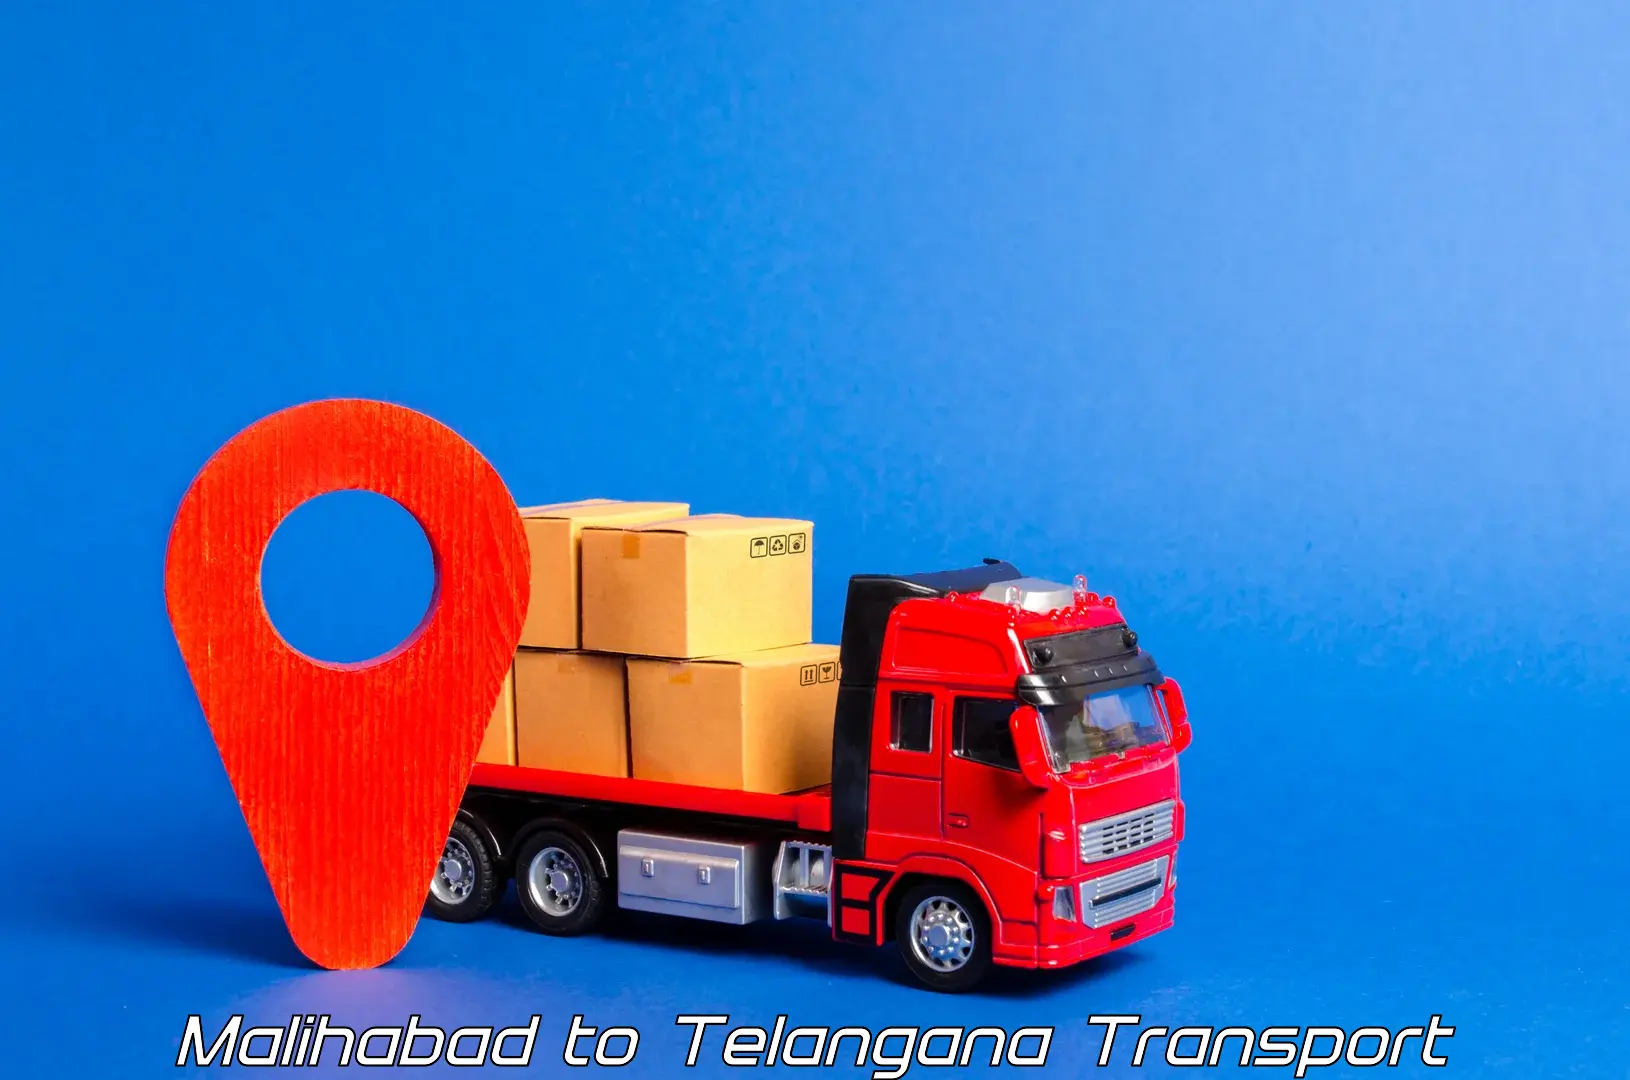 Package delivery services Malihabad to Gangadhara